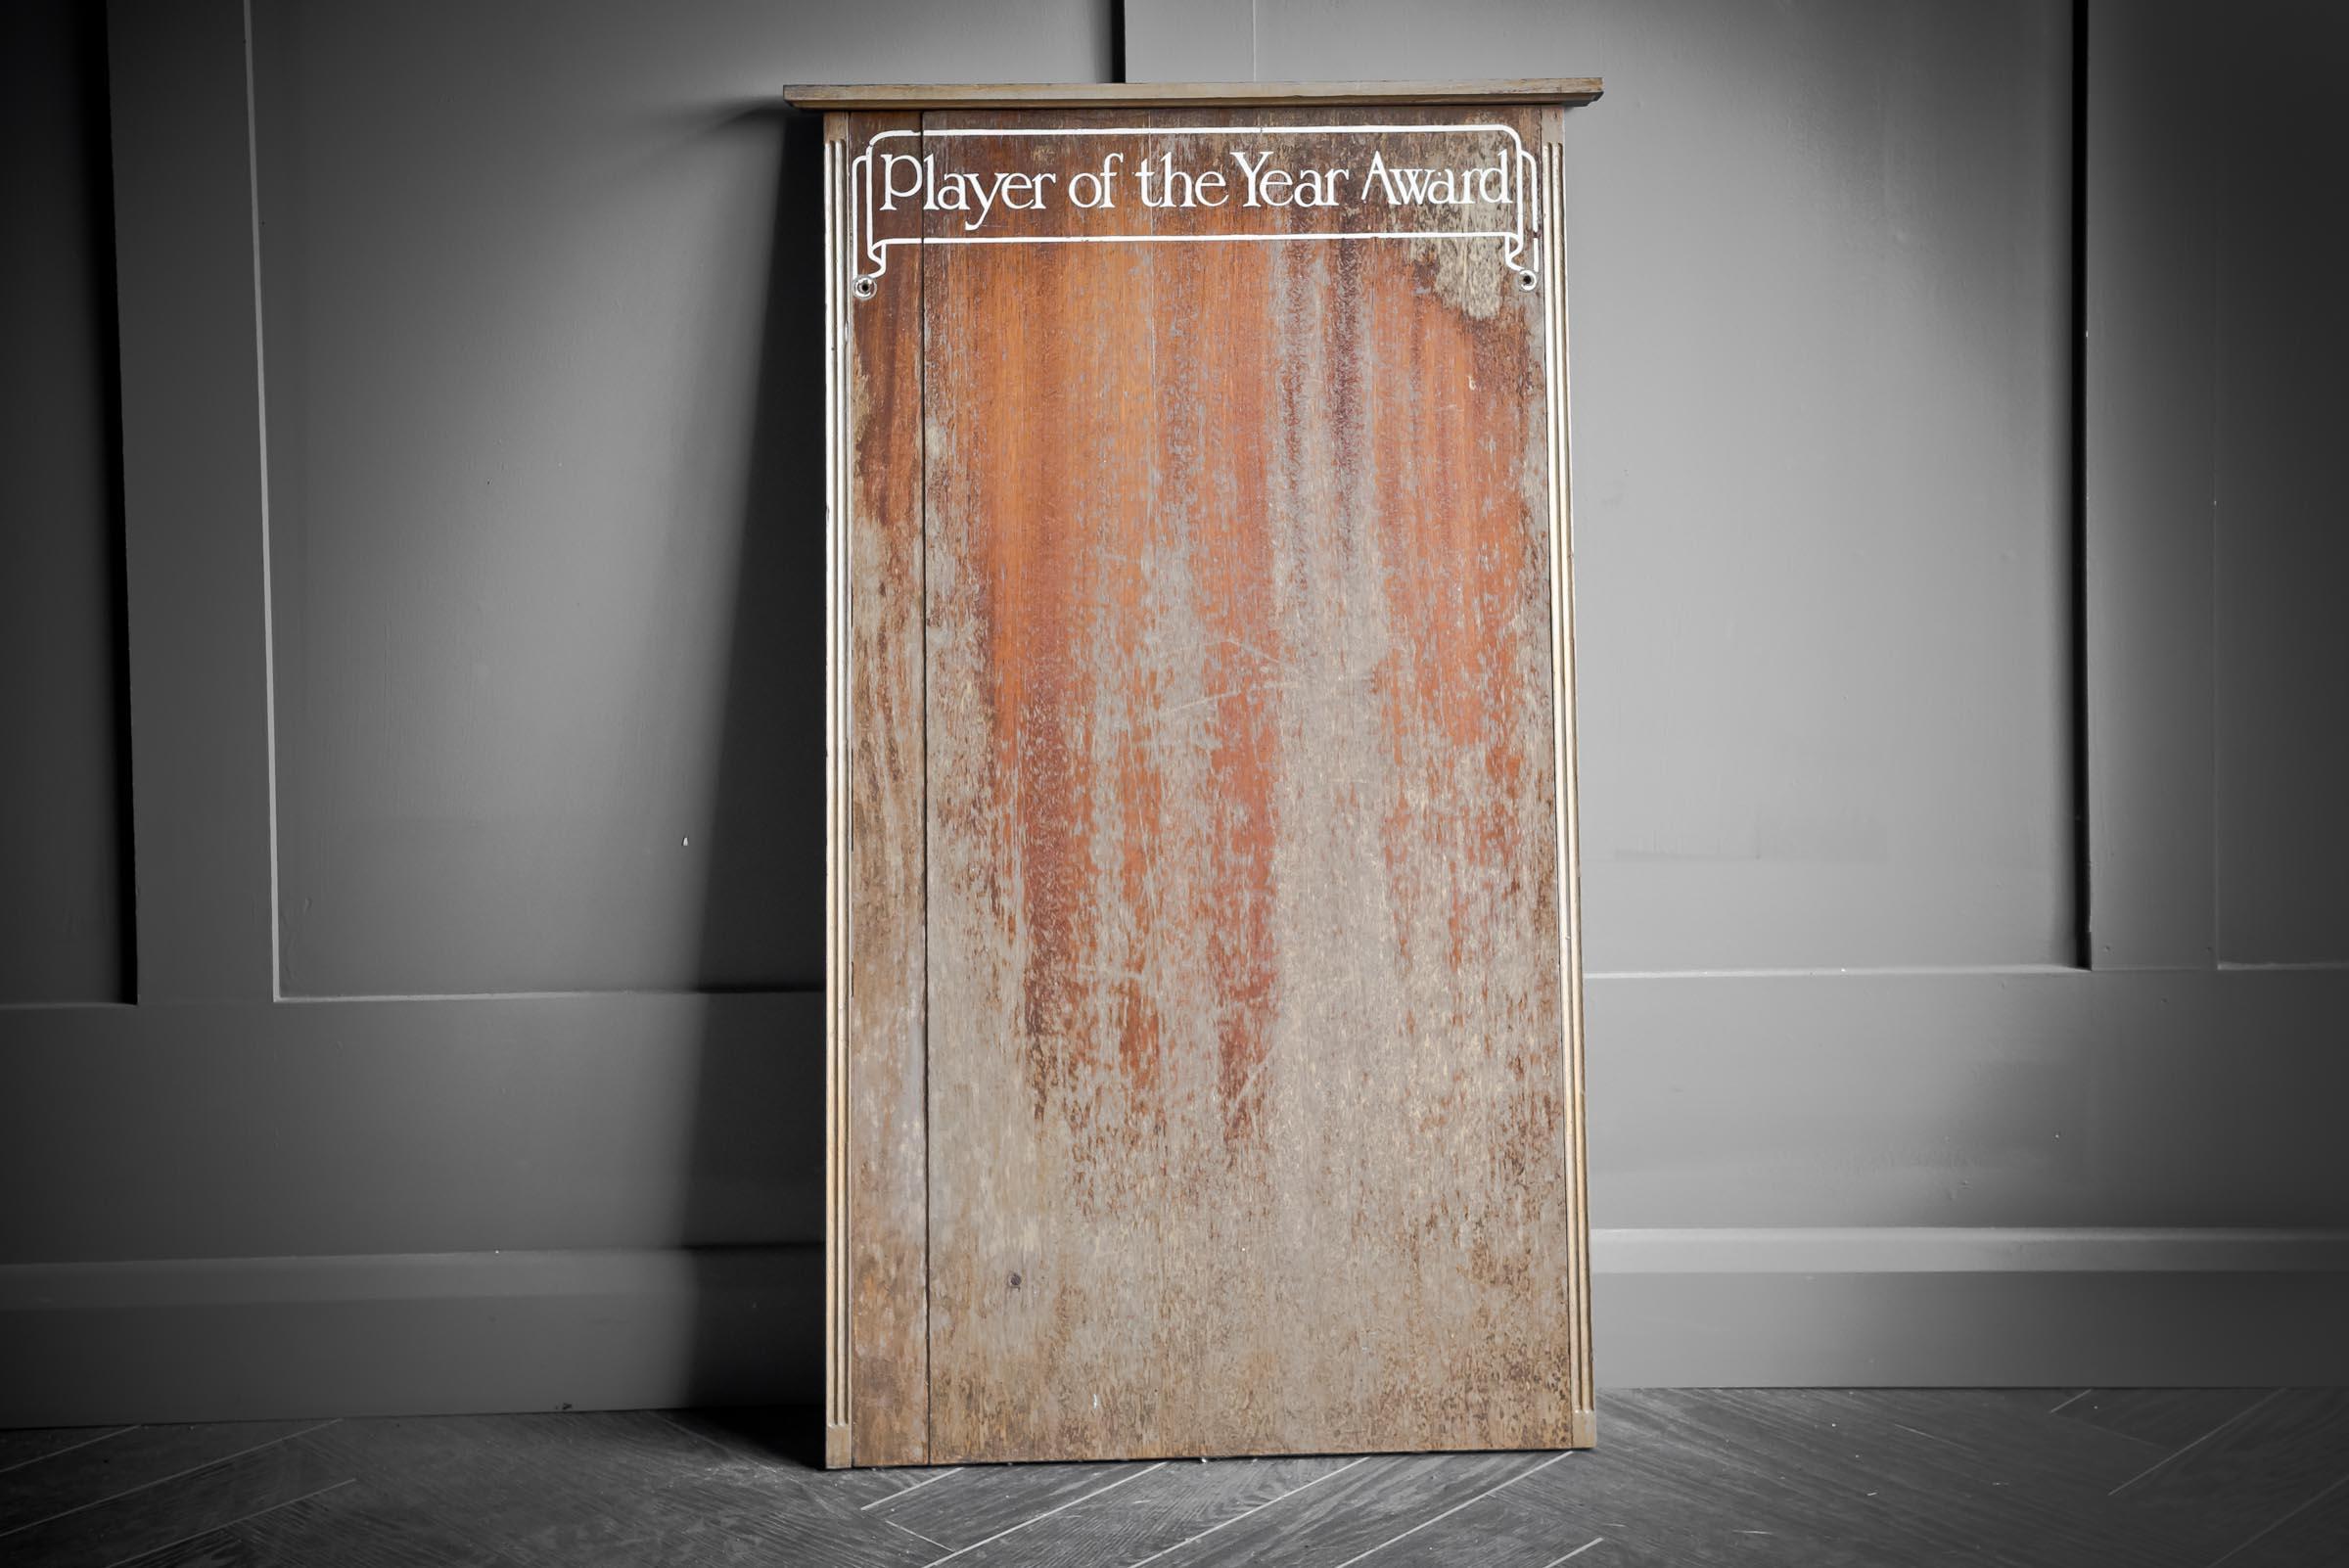 A beautiful vintage wooden Player of The Year leader board with hand painted lettering. The perfect addition to any man cave or kids playroom if you consider yourself or your family even slightly competitive! Let the games begin.